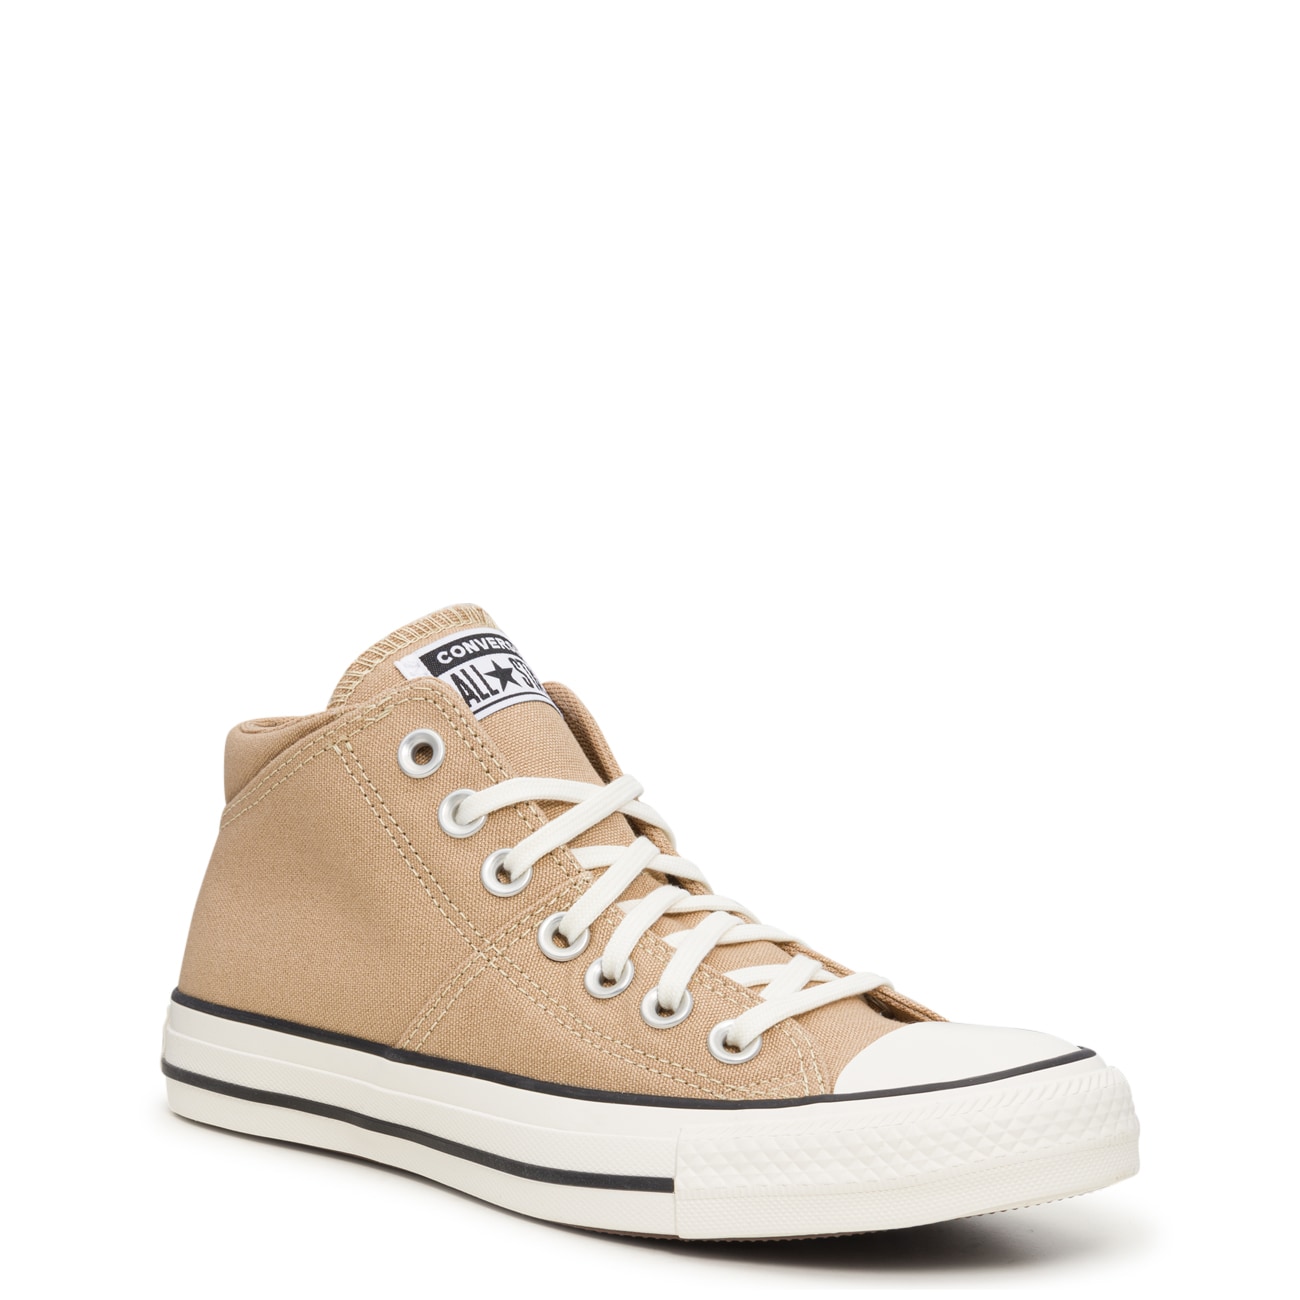 Women's Chuck Taylor All Star Madison Mid Sneaker